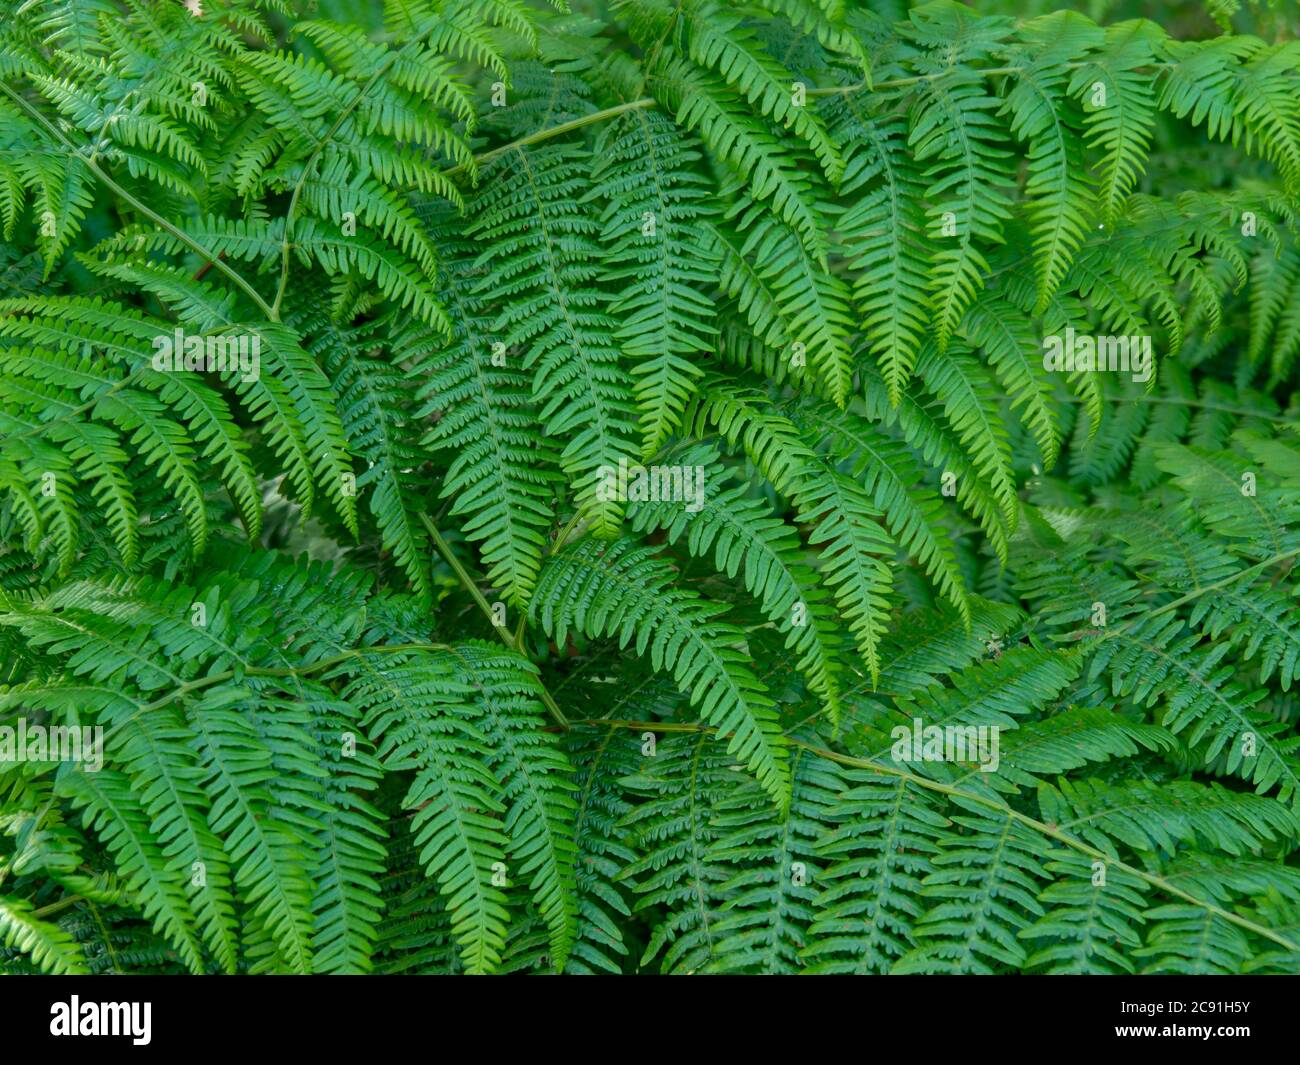 Closeup of the dense overlapping green leaves of bracken plants Stock Photo